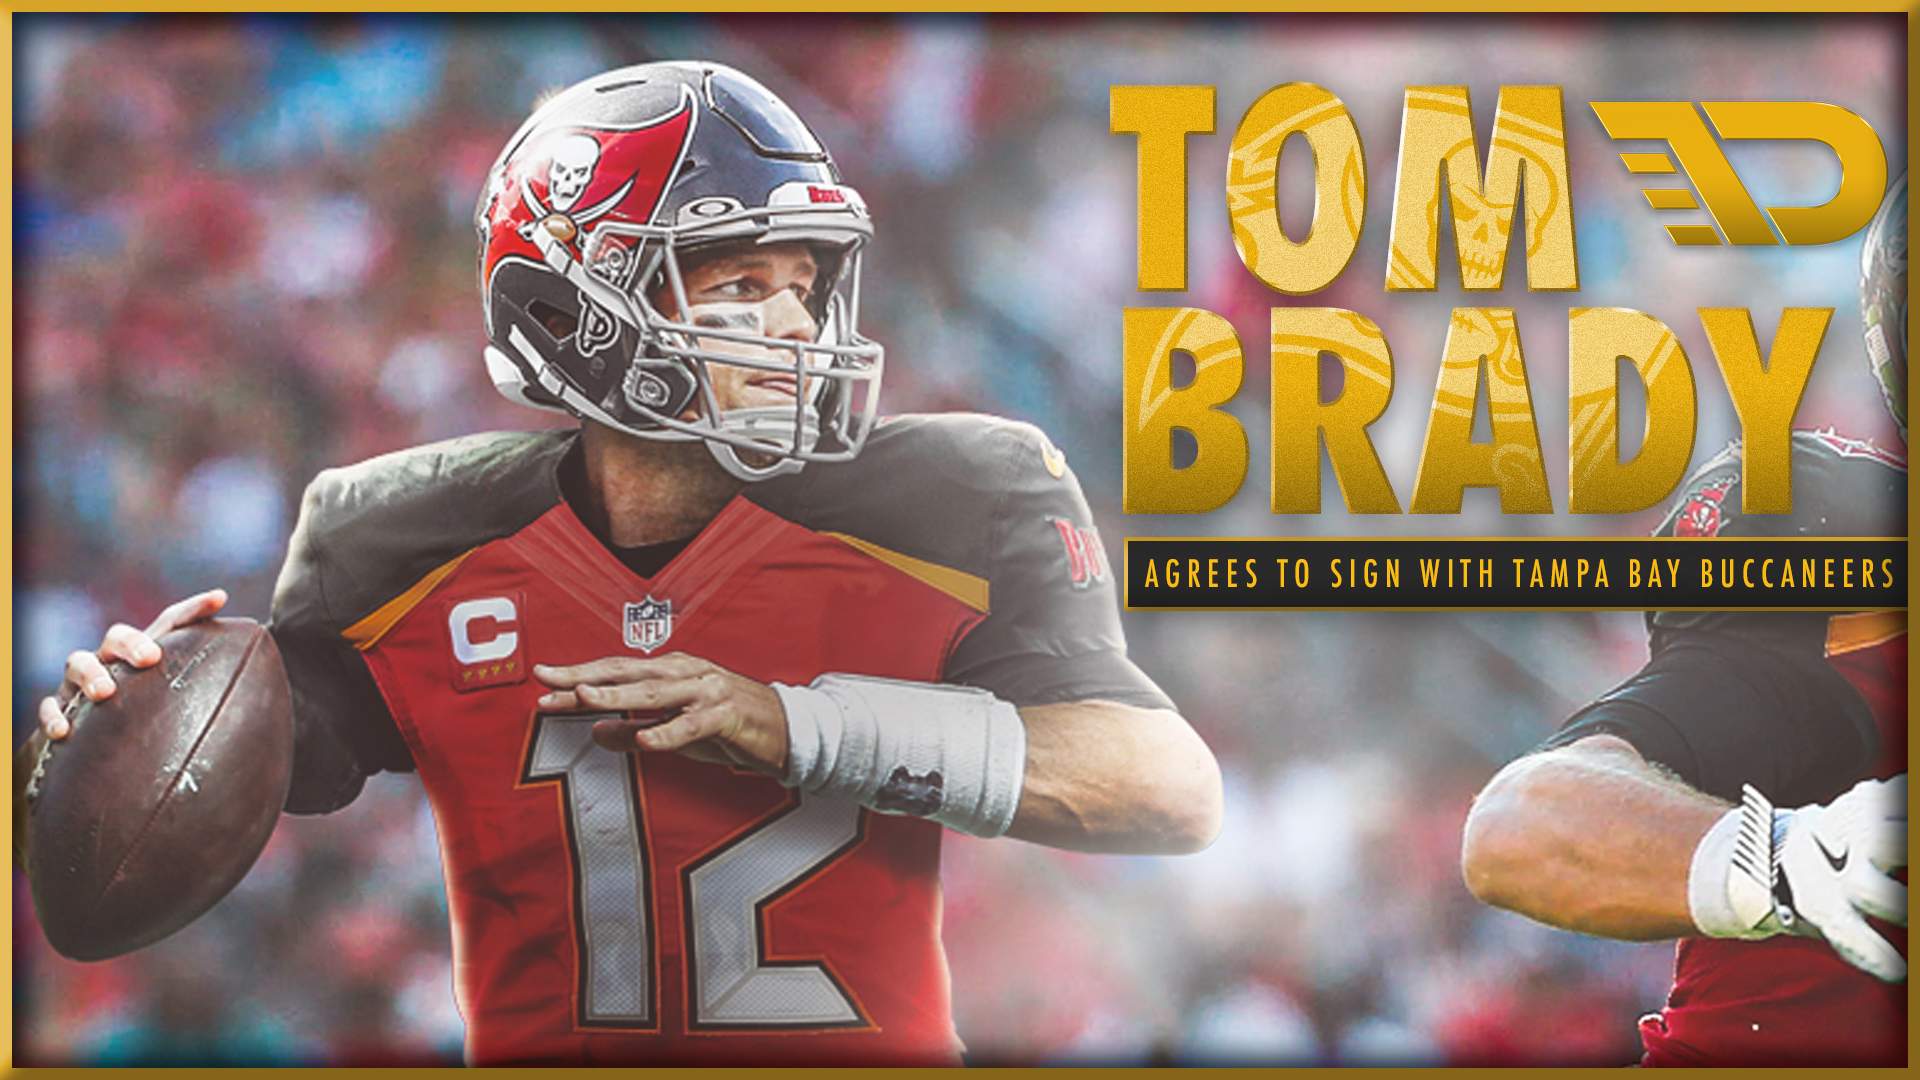 Tampa Bay Buccaneers on Twitter WallpaperWednesday  TomBrady  httpstcor2ytXCpg3b  Twitter